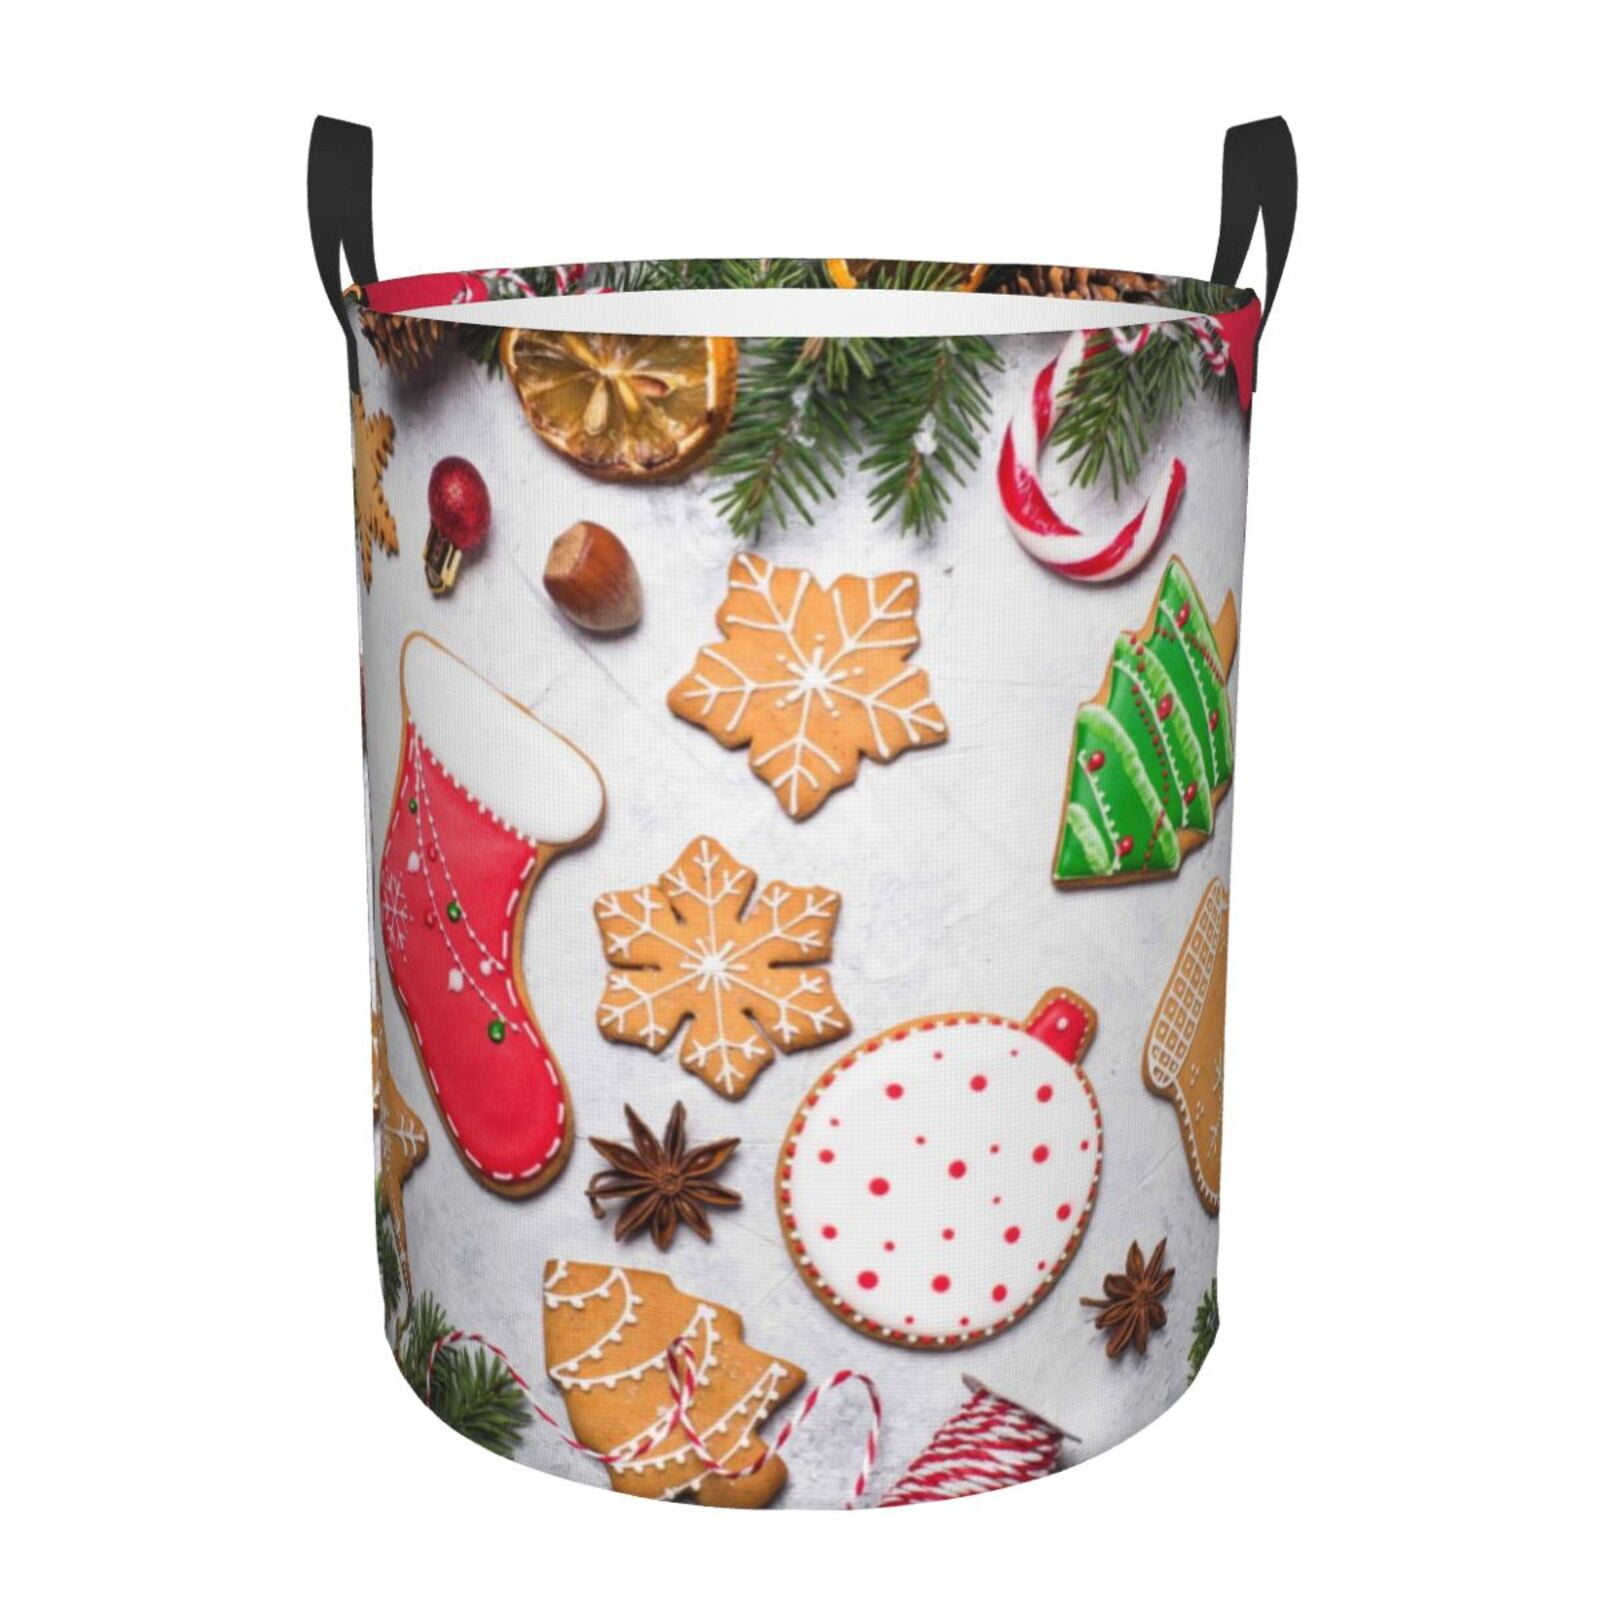 Easygdp Christmas Gingerbread Cookies Large Dirty Clothes Hamper ...